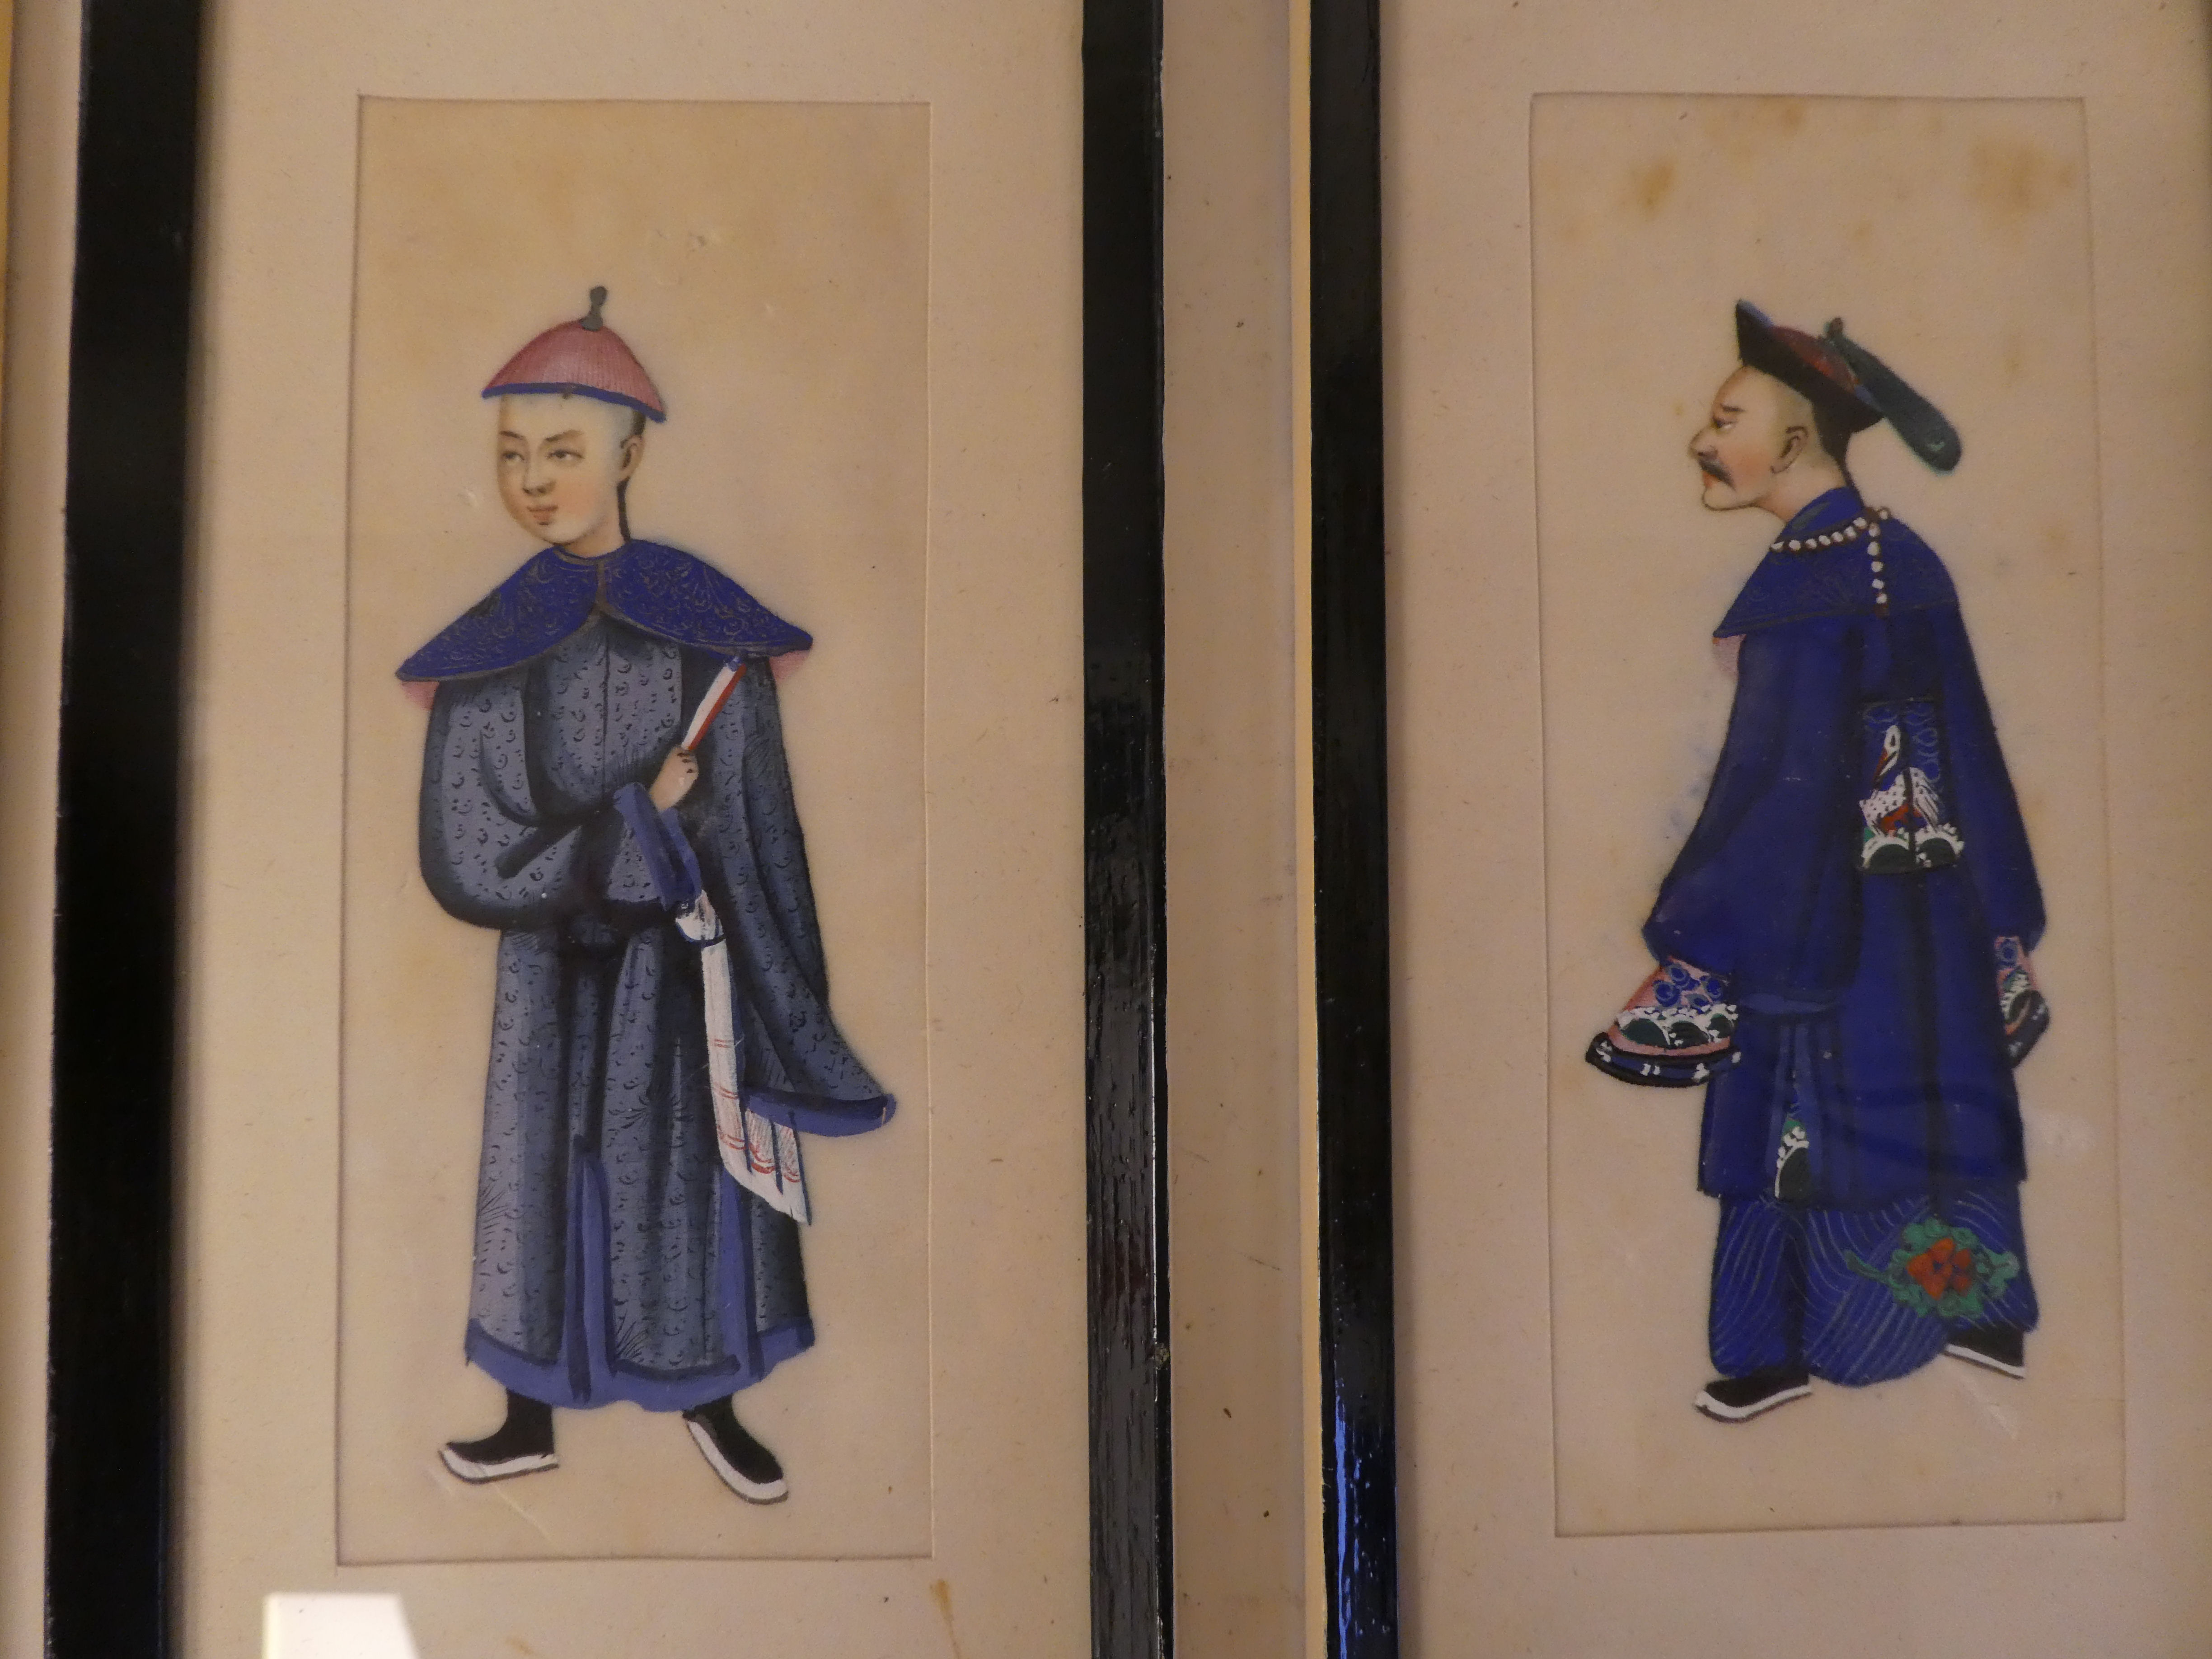 A set of six early 20thC Chinese figure studies  mixed media on ricepaper  2.5" x 6"  framed - Image 3 of 4